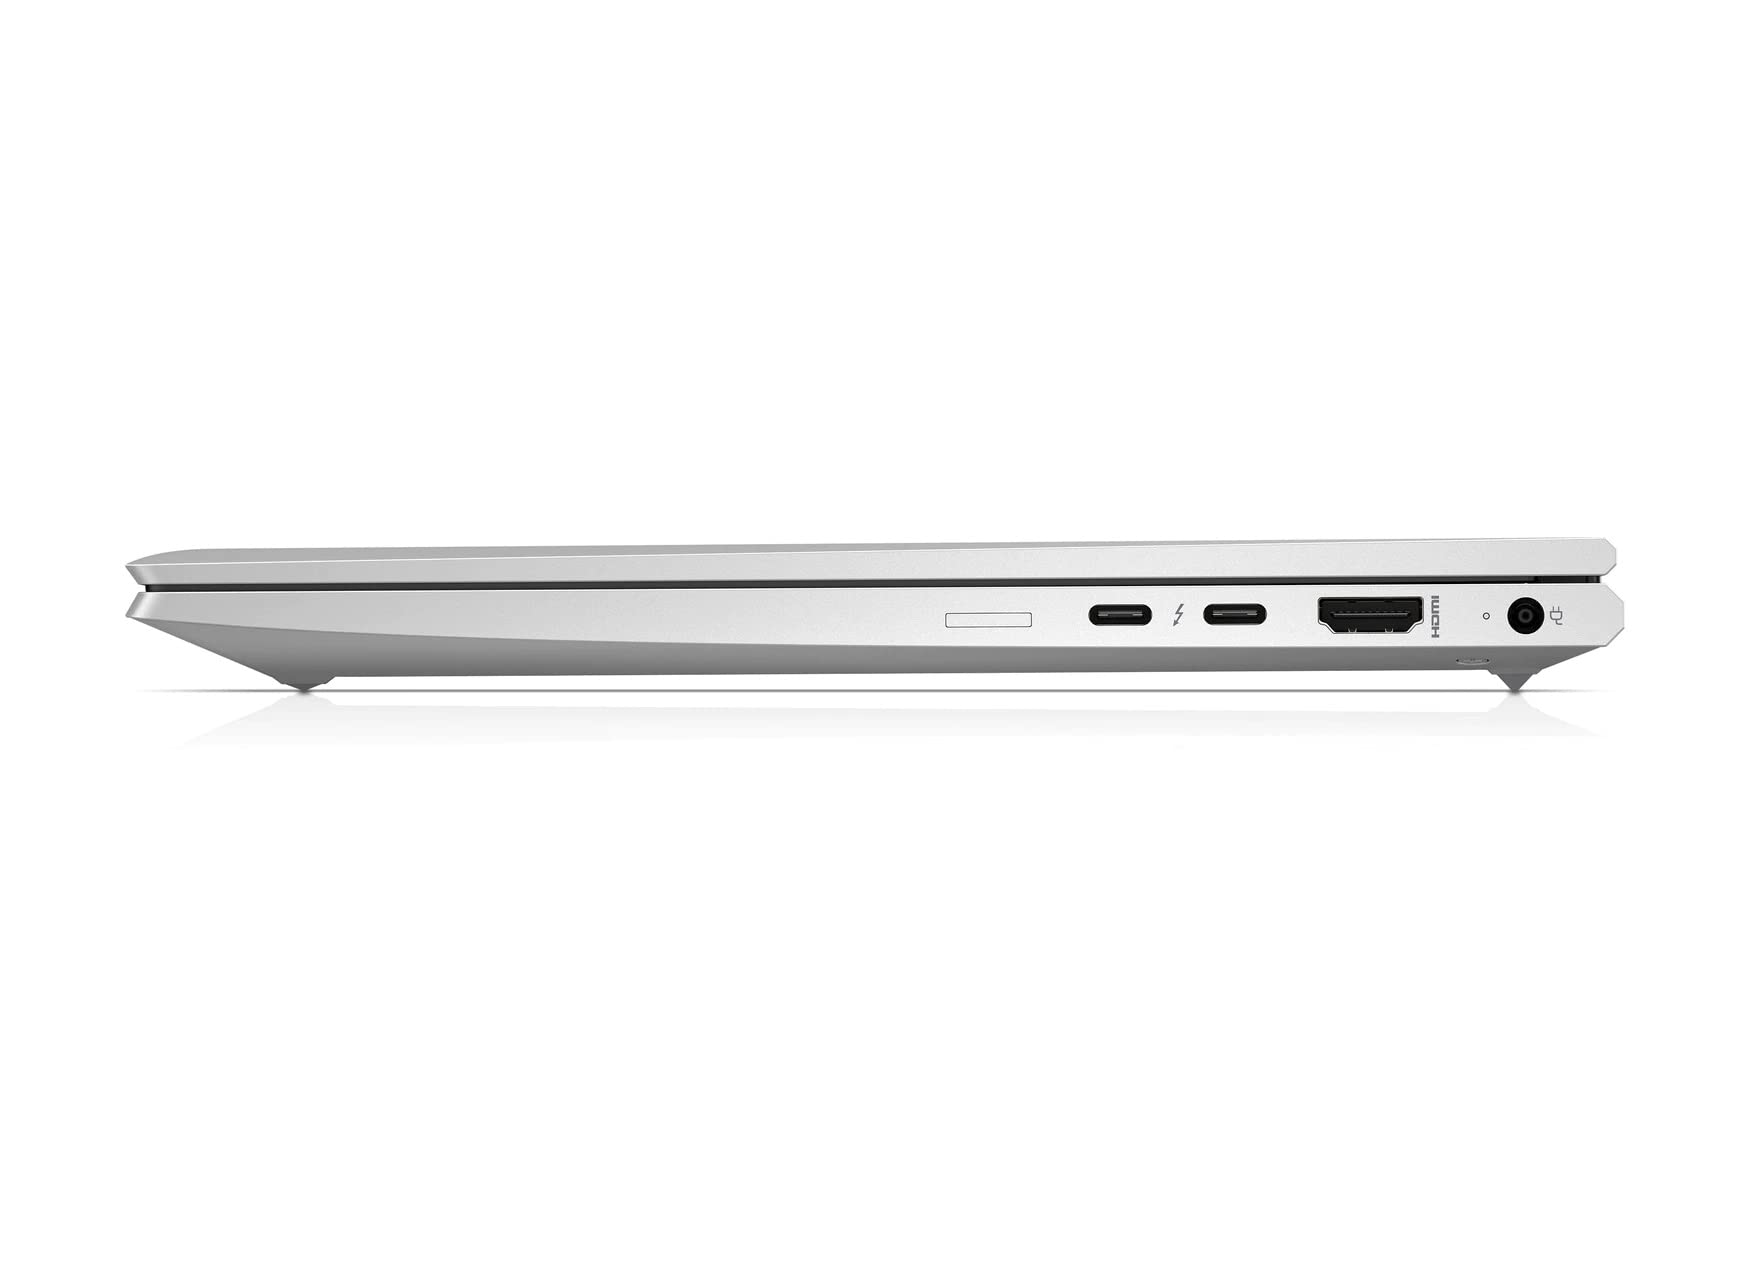 HP EliteBook 830 G8 13.3" FHD Laptop with HP Sure View Privacy Screen - i7 1165G7, 16GB DDR4, 1TB SSD, Smart Card Reader, WIFI 6E & BT 5.2, Iris Xe Graphics, Free upgrade to Windows 11 Pro (Renewed)